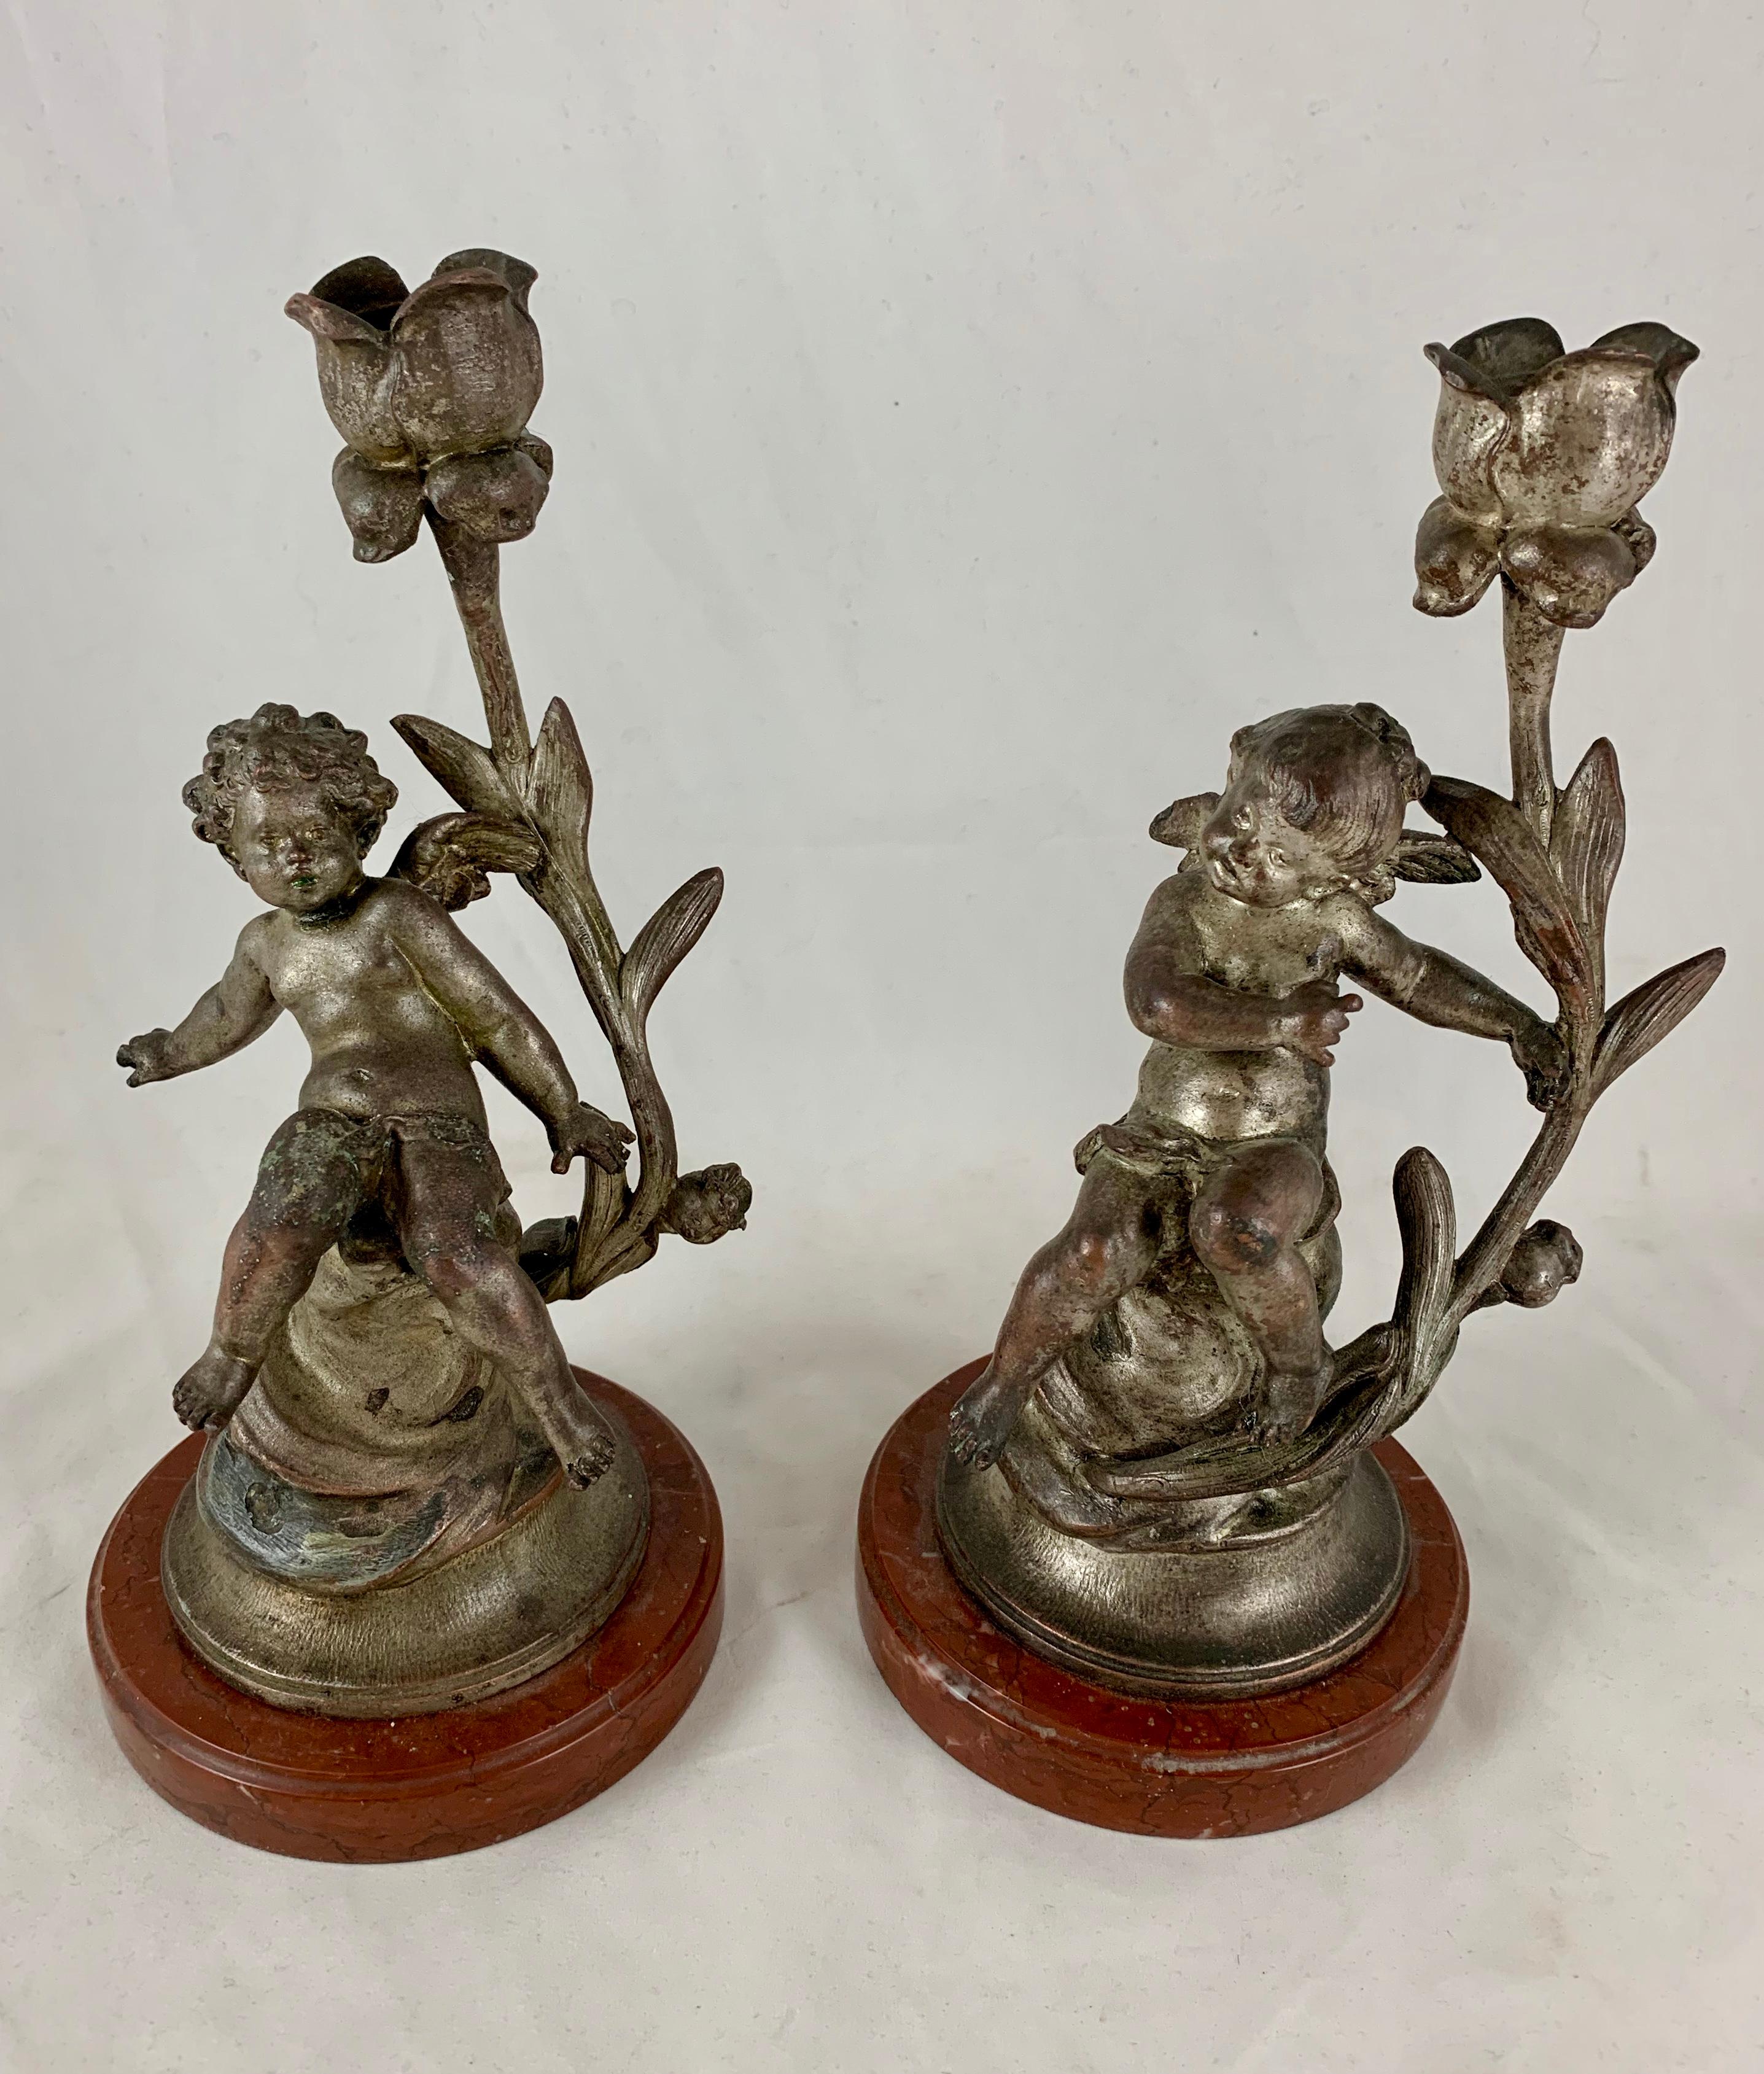 Cast French Putti Cherub Candlesticks Signed Sylvain Kinsburger Spelter & Marble S/2